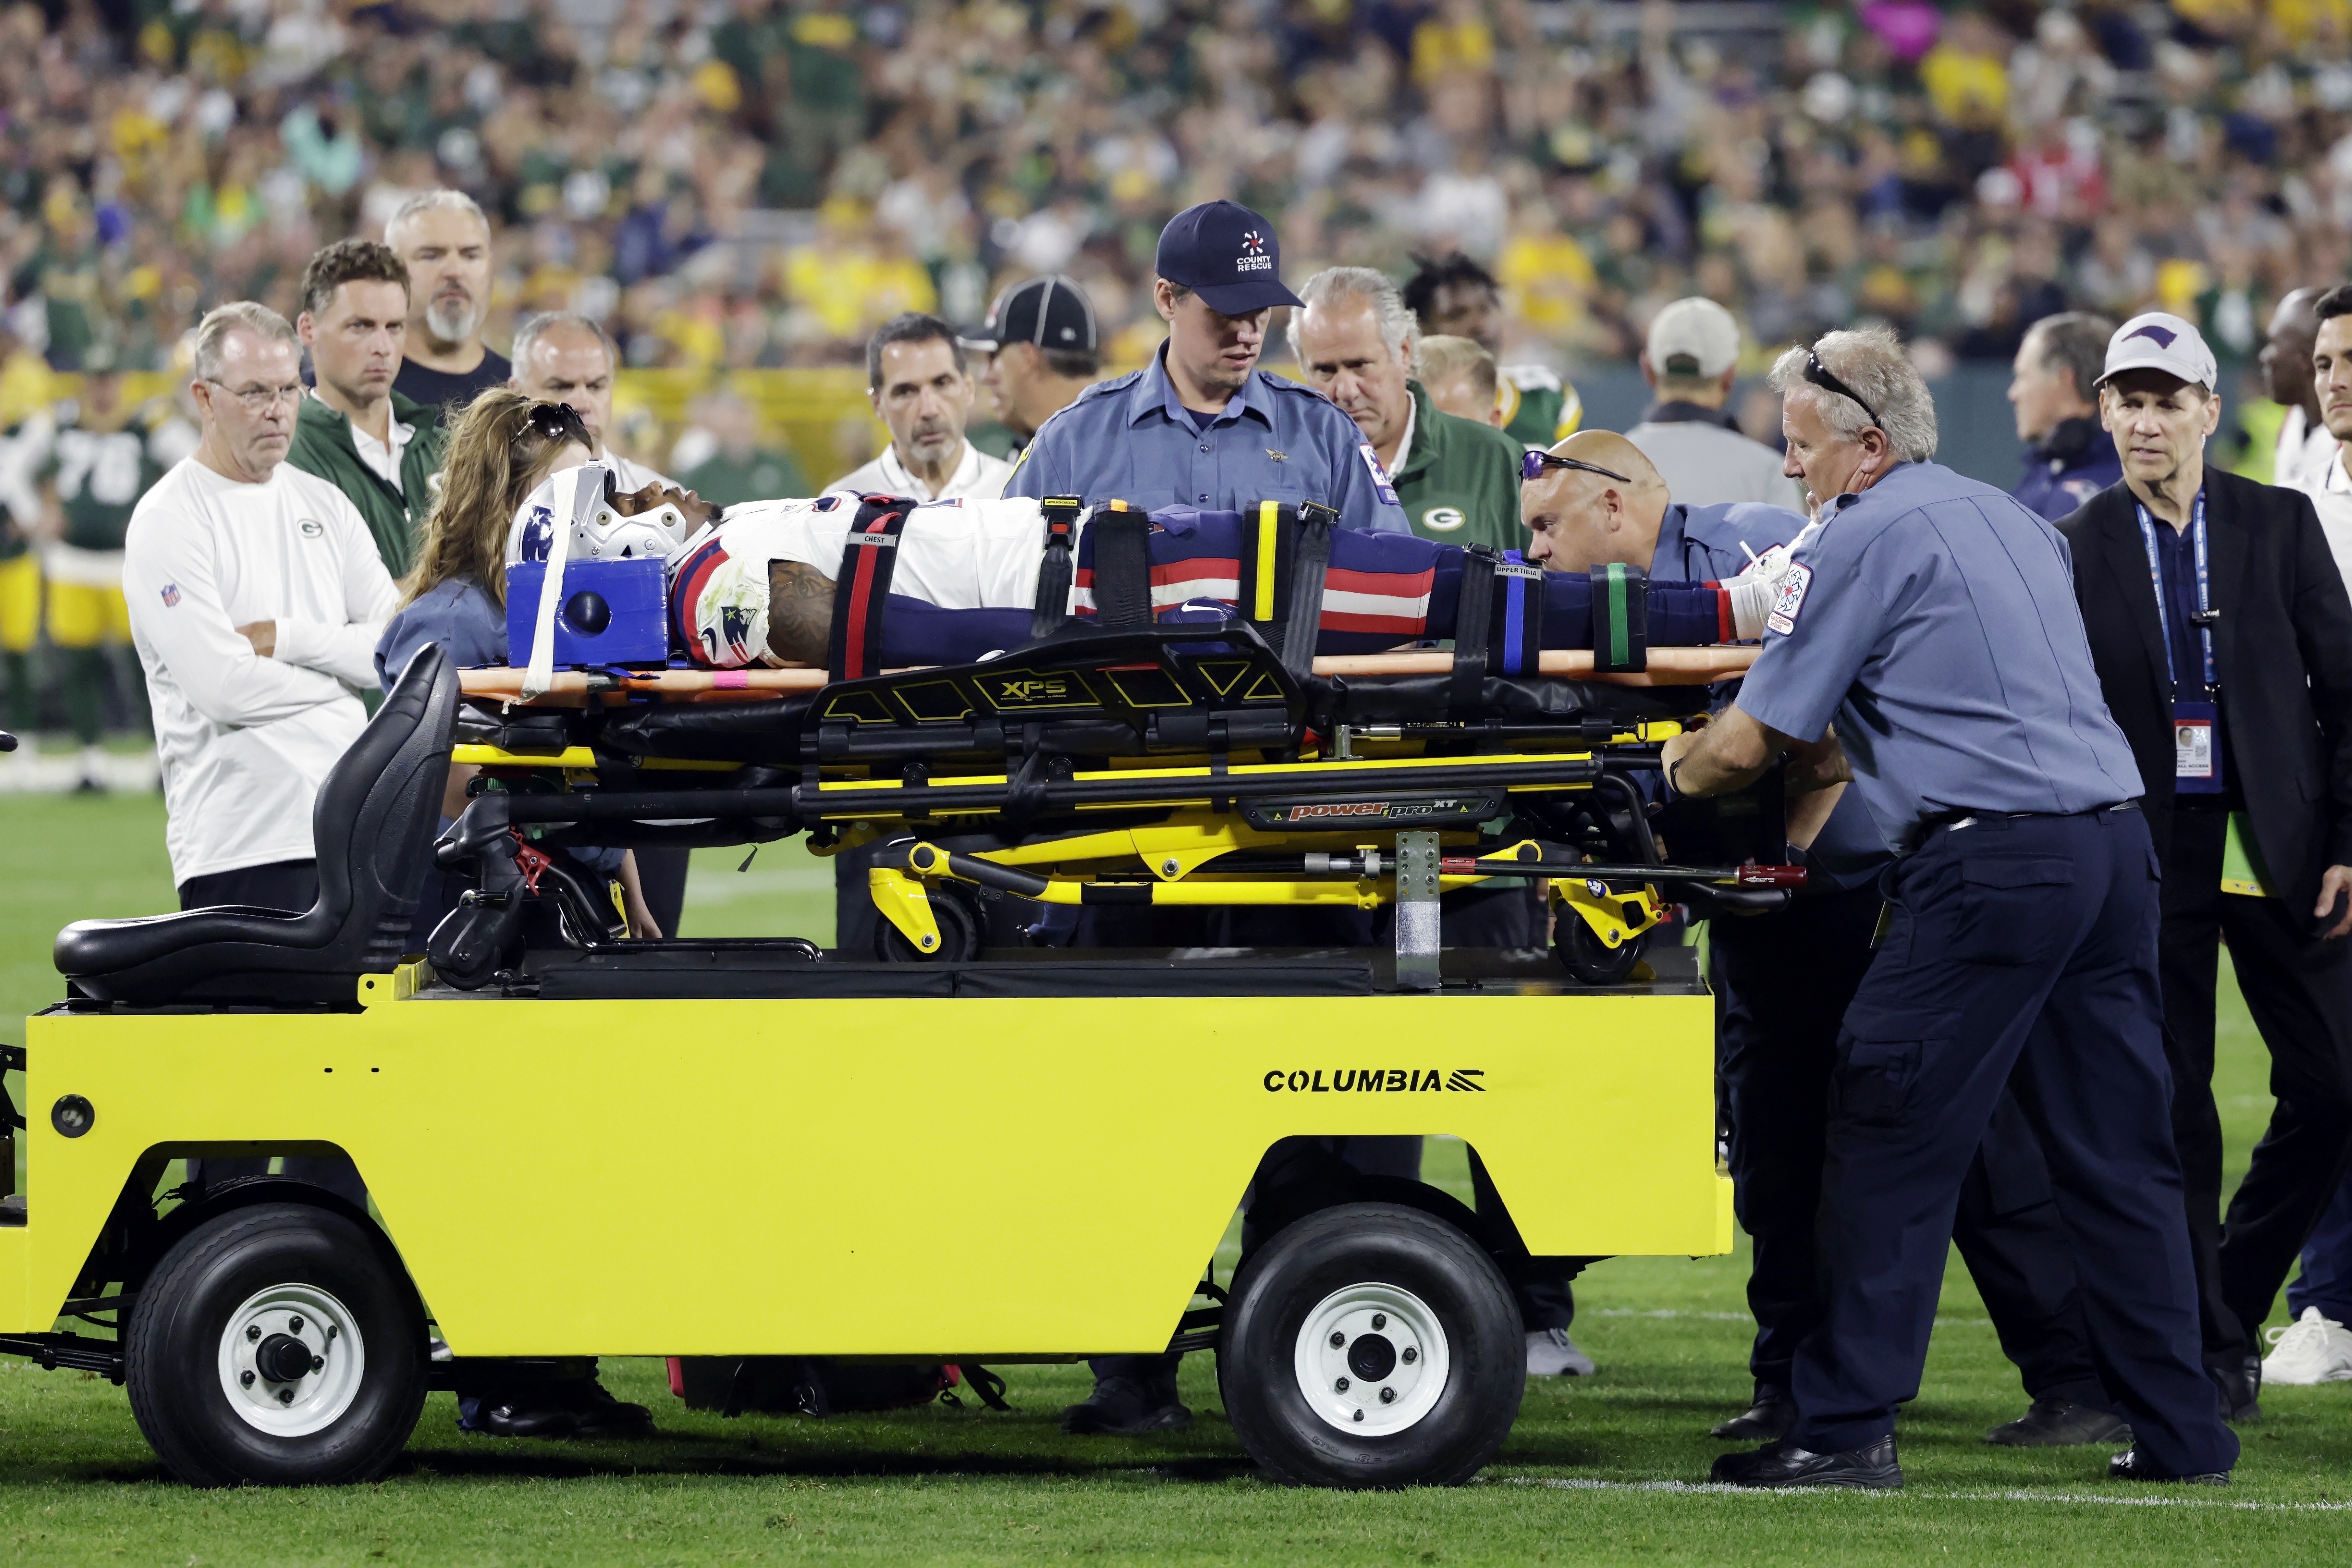 Patriots-Packers preseason game suspended after rookie Isaiah Bolden  suffers head injury - The Boston Globe